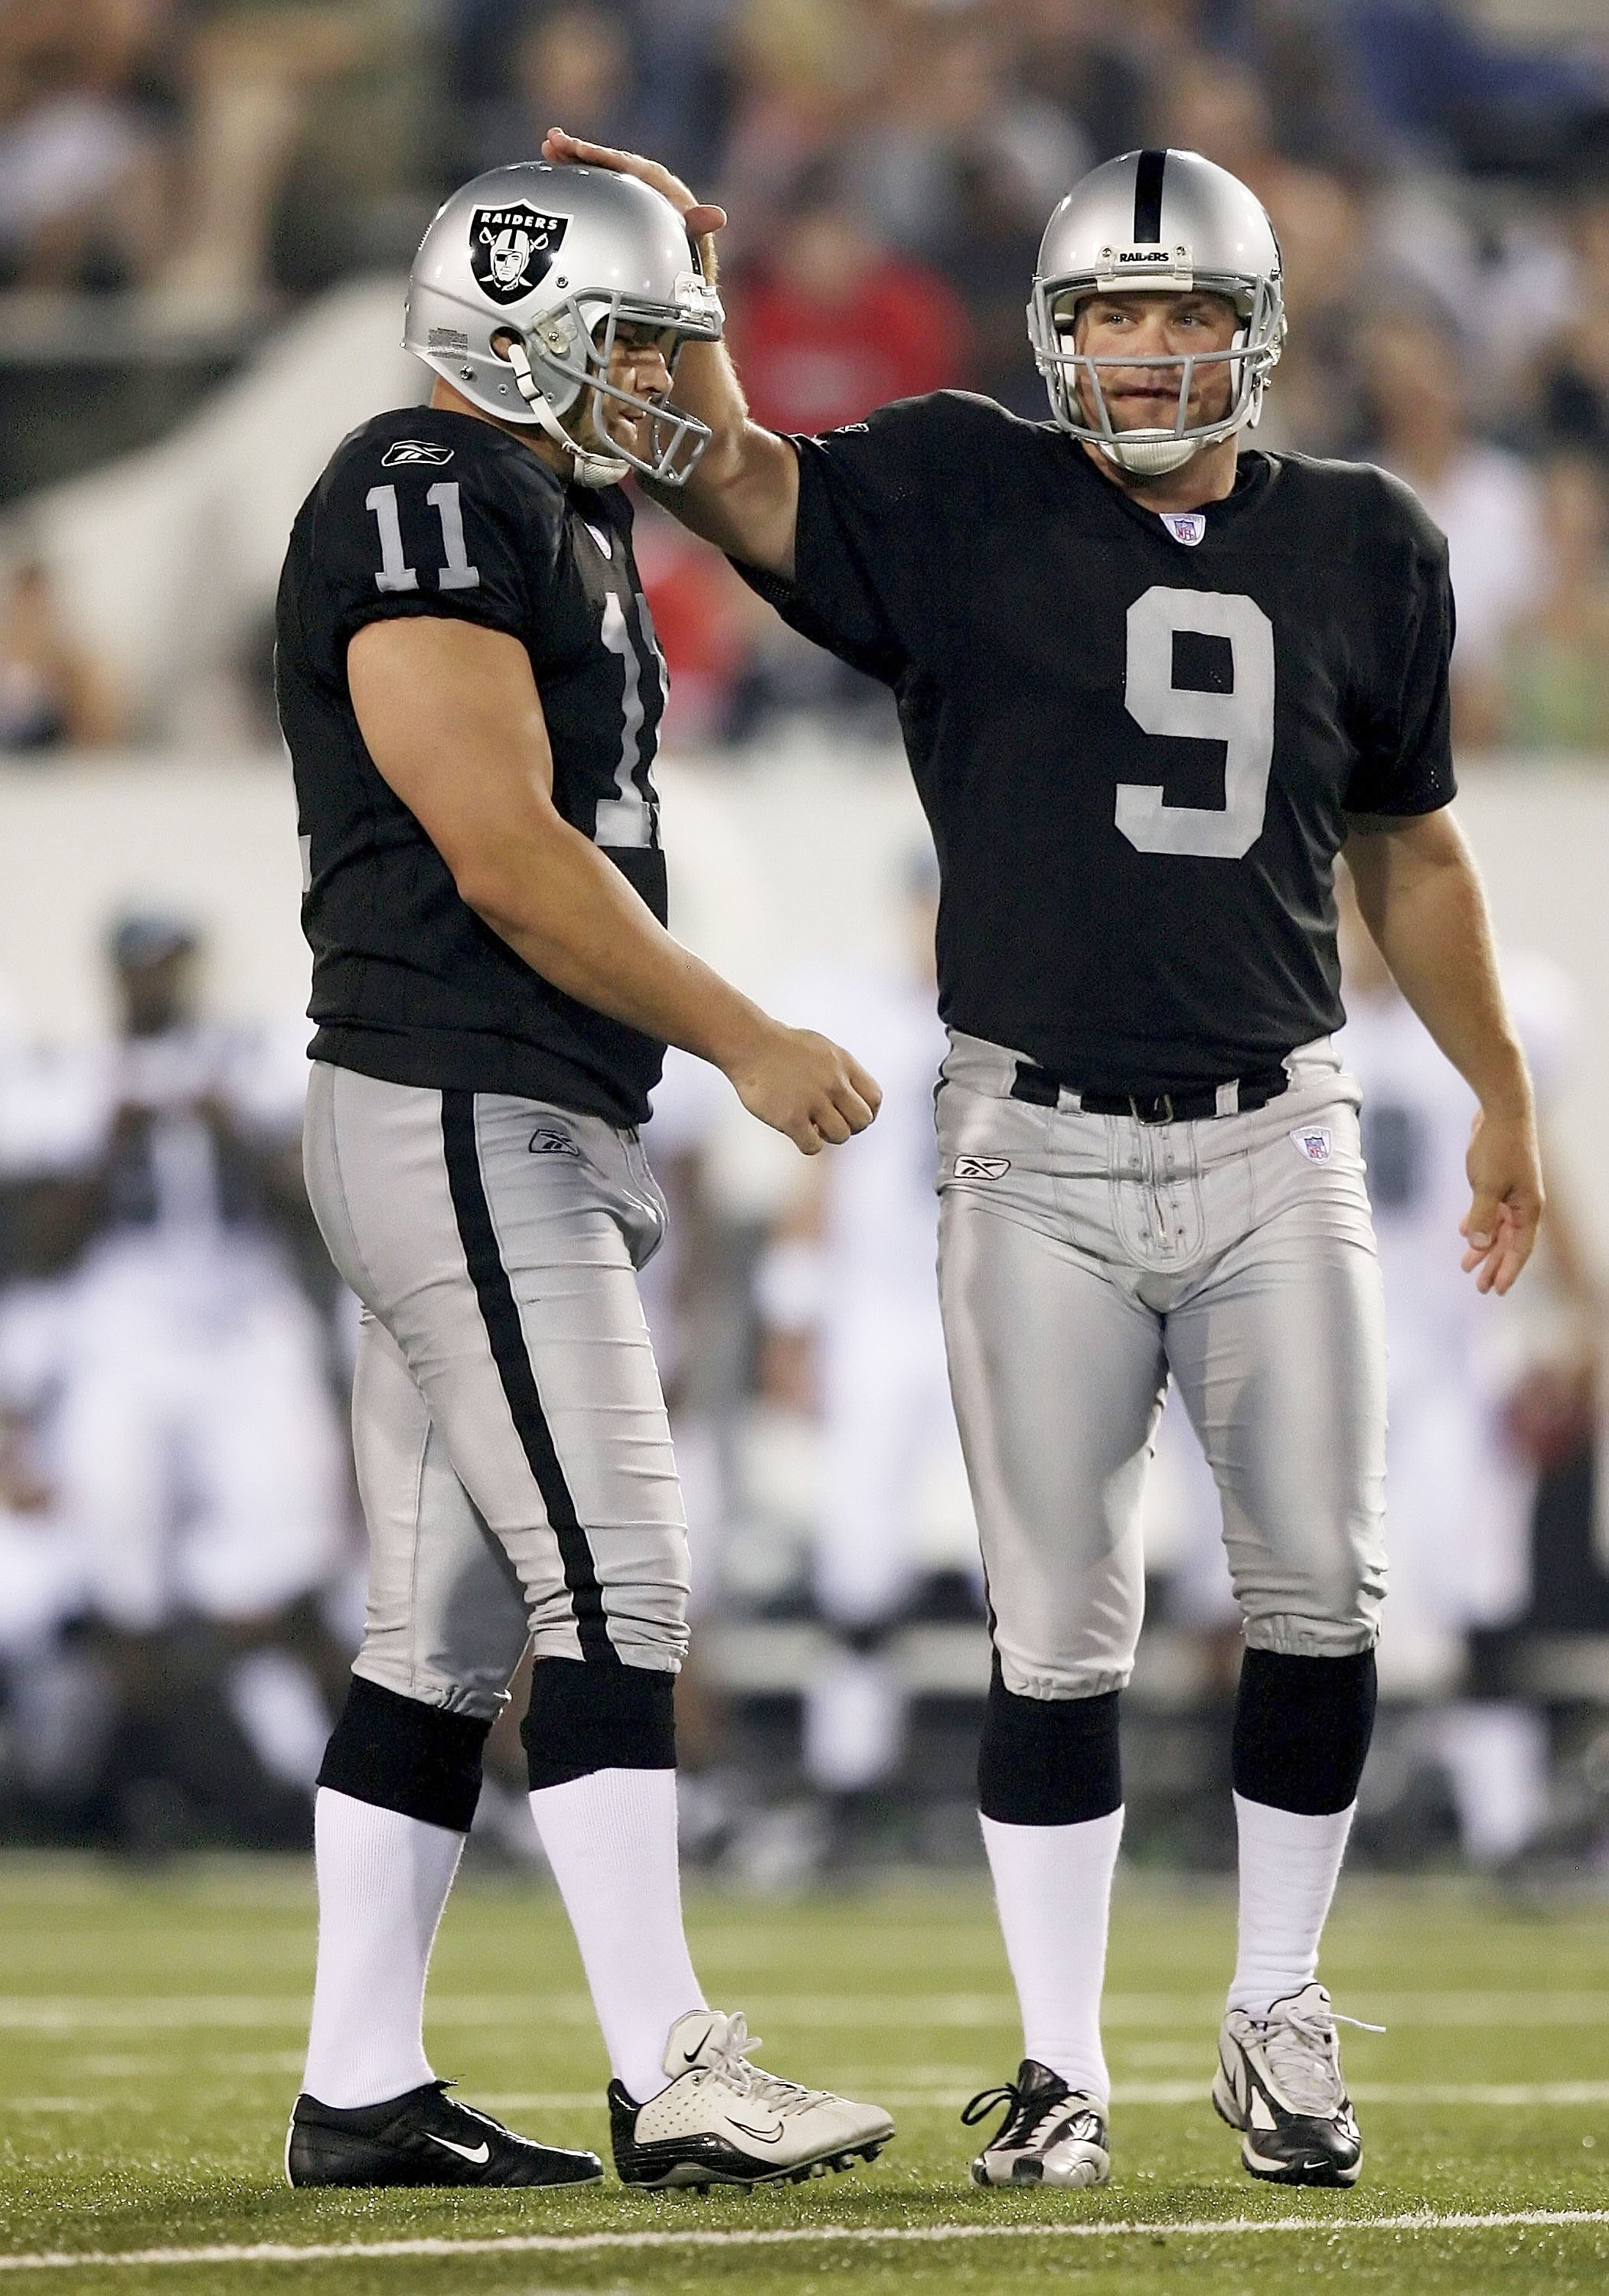 CANTON, OH - AUGUST 6: Place kicker Sebastian Janikowski #11 of the Oakland Raiders is congratulated by holder Shane Lechler #9 after Janikowskit kicked a 51-yard field goal in the third quarter against the Philadelphia Eagles in the AFC-NFC Pro Football 